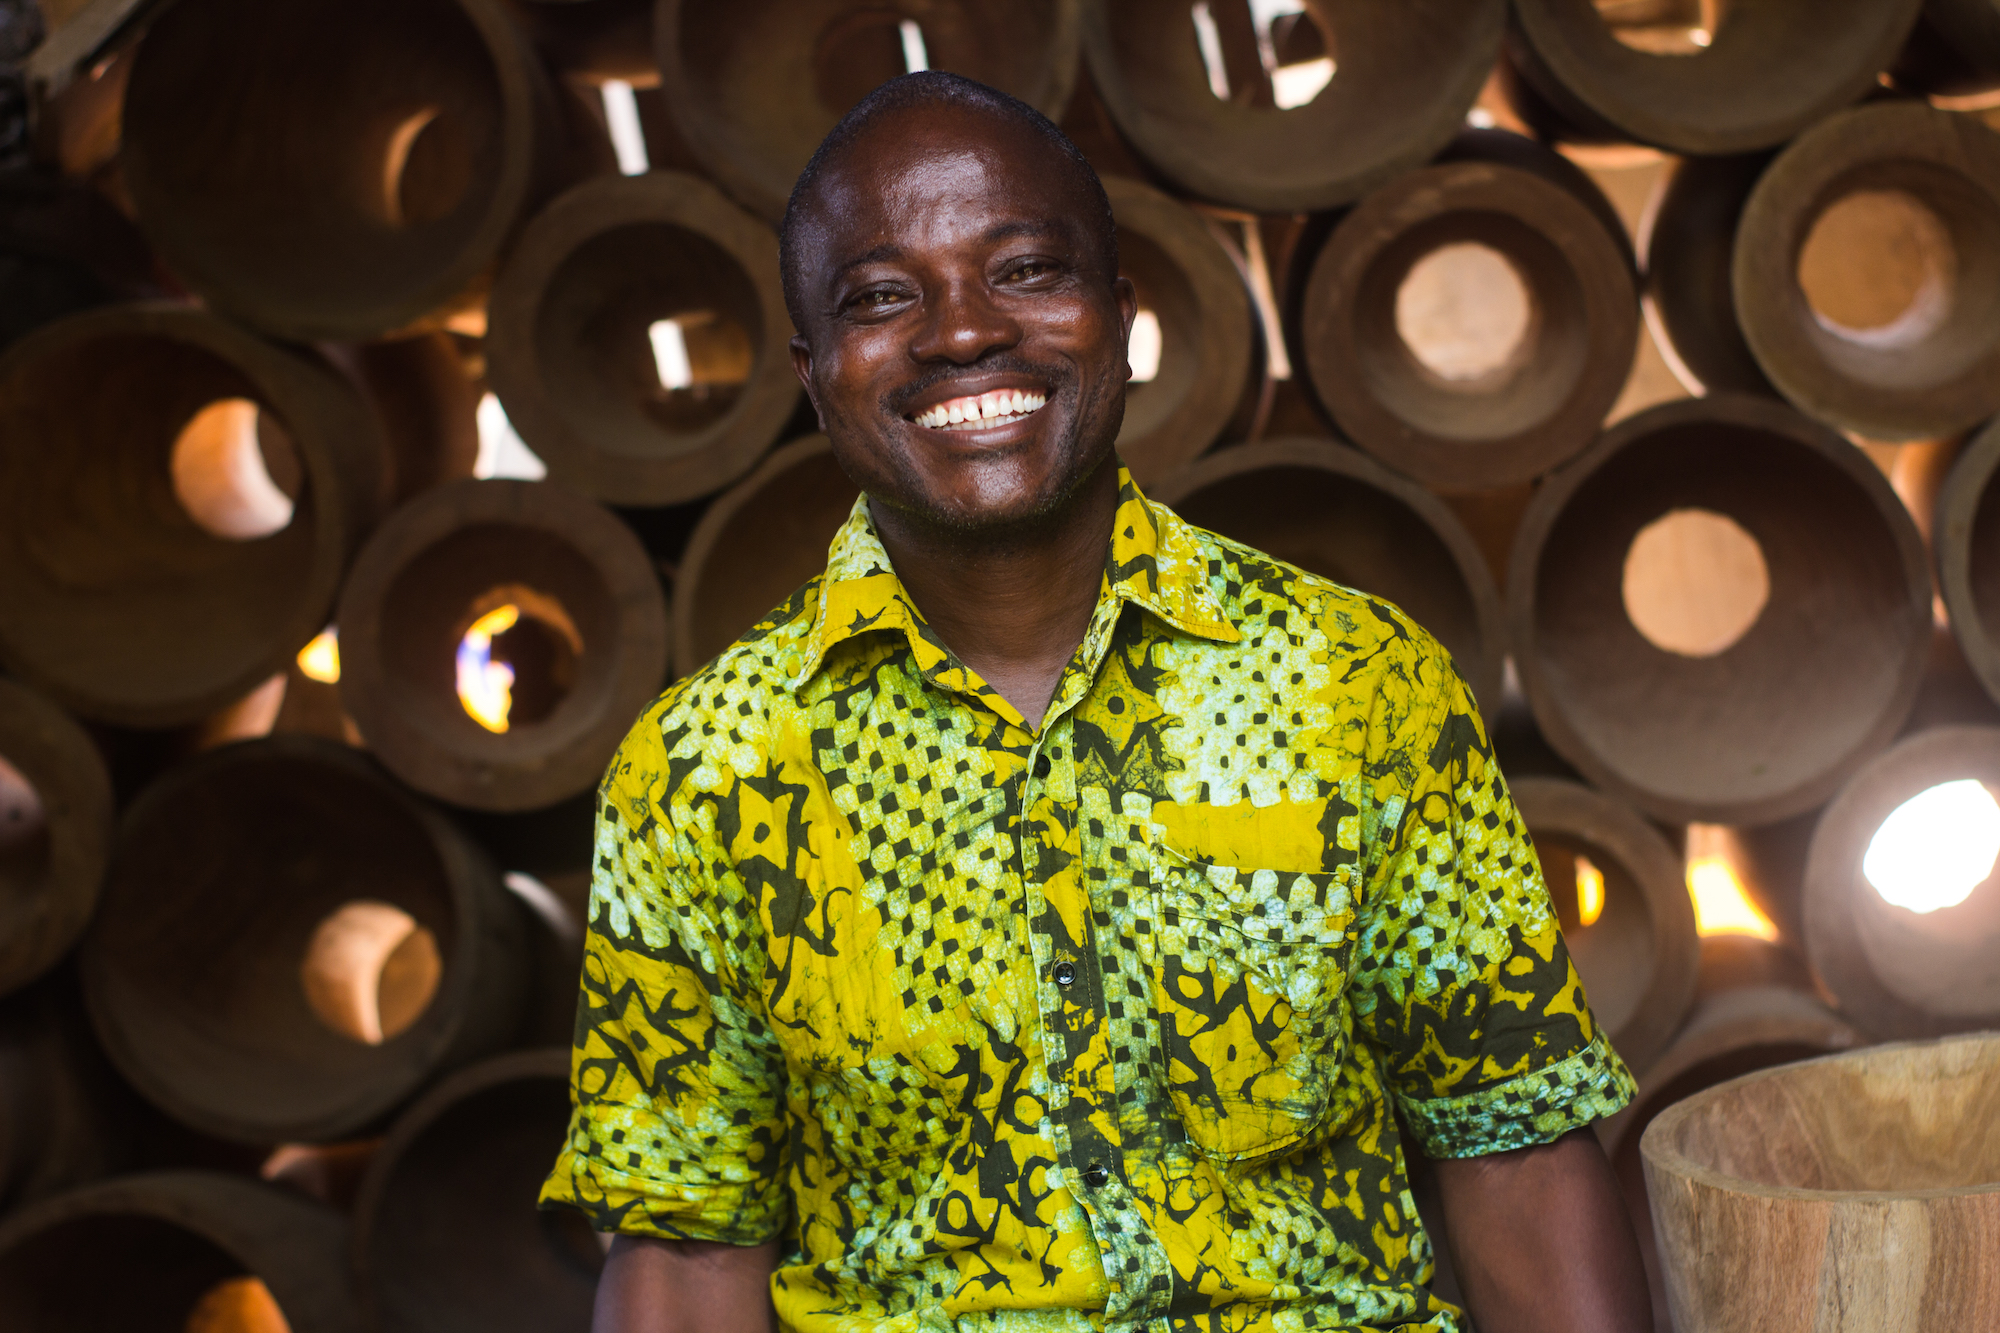 NOVICA artisan, Daniel Asante with drum shells in the background